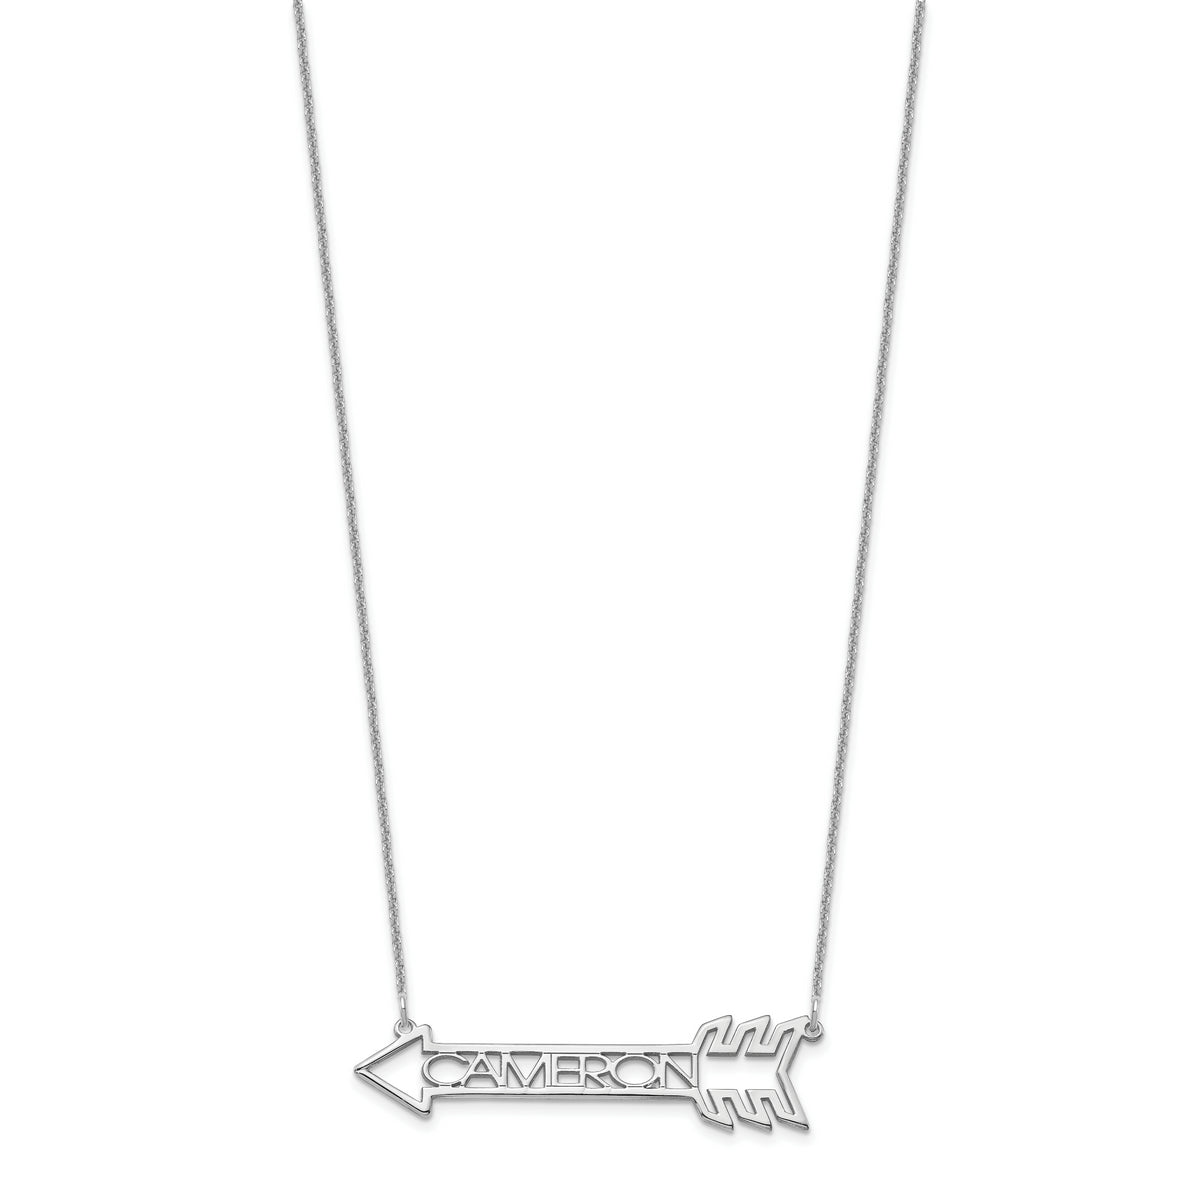 Personalized Name Arrow Necklace (1.5 inches wide) Available in Sterling Silver, Gold Plate/SS, Rose Gold Plated/SS, 10K Yellow & White Gold